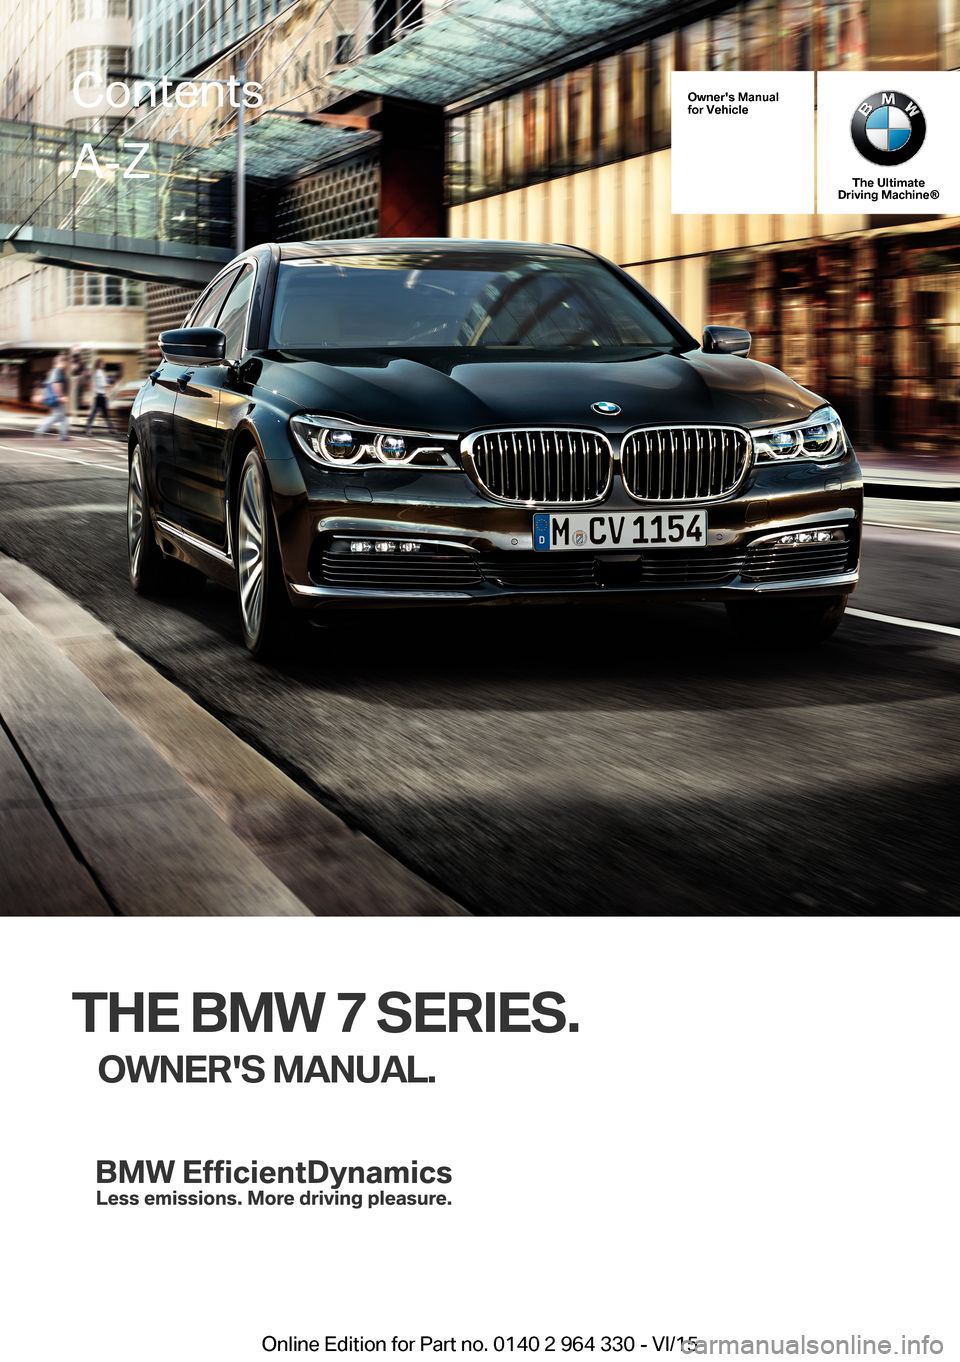 BMW 7 SERIES 2016 G12 Owners Manual Owners Manualfor Vehicle
The UltimateDriving Machine®
THE BMW 7 SERIES.
OWNERS MANUAL.ContentsA-Z
Online Edition for Part no. 0140 2 964 330 - VI/15   